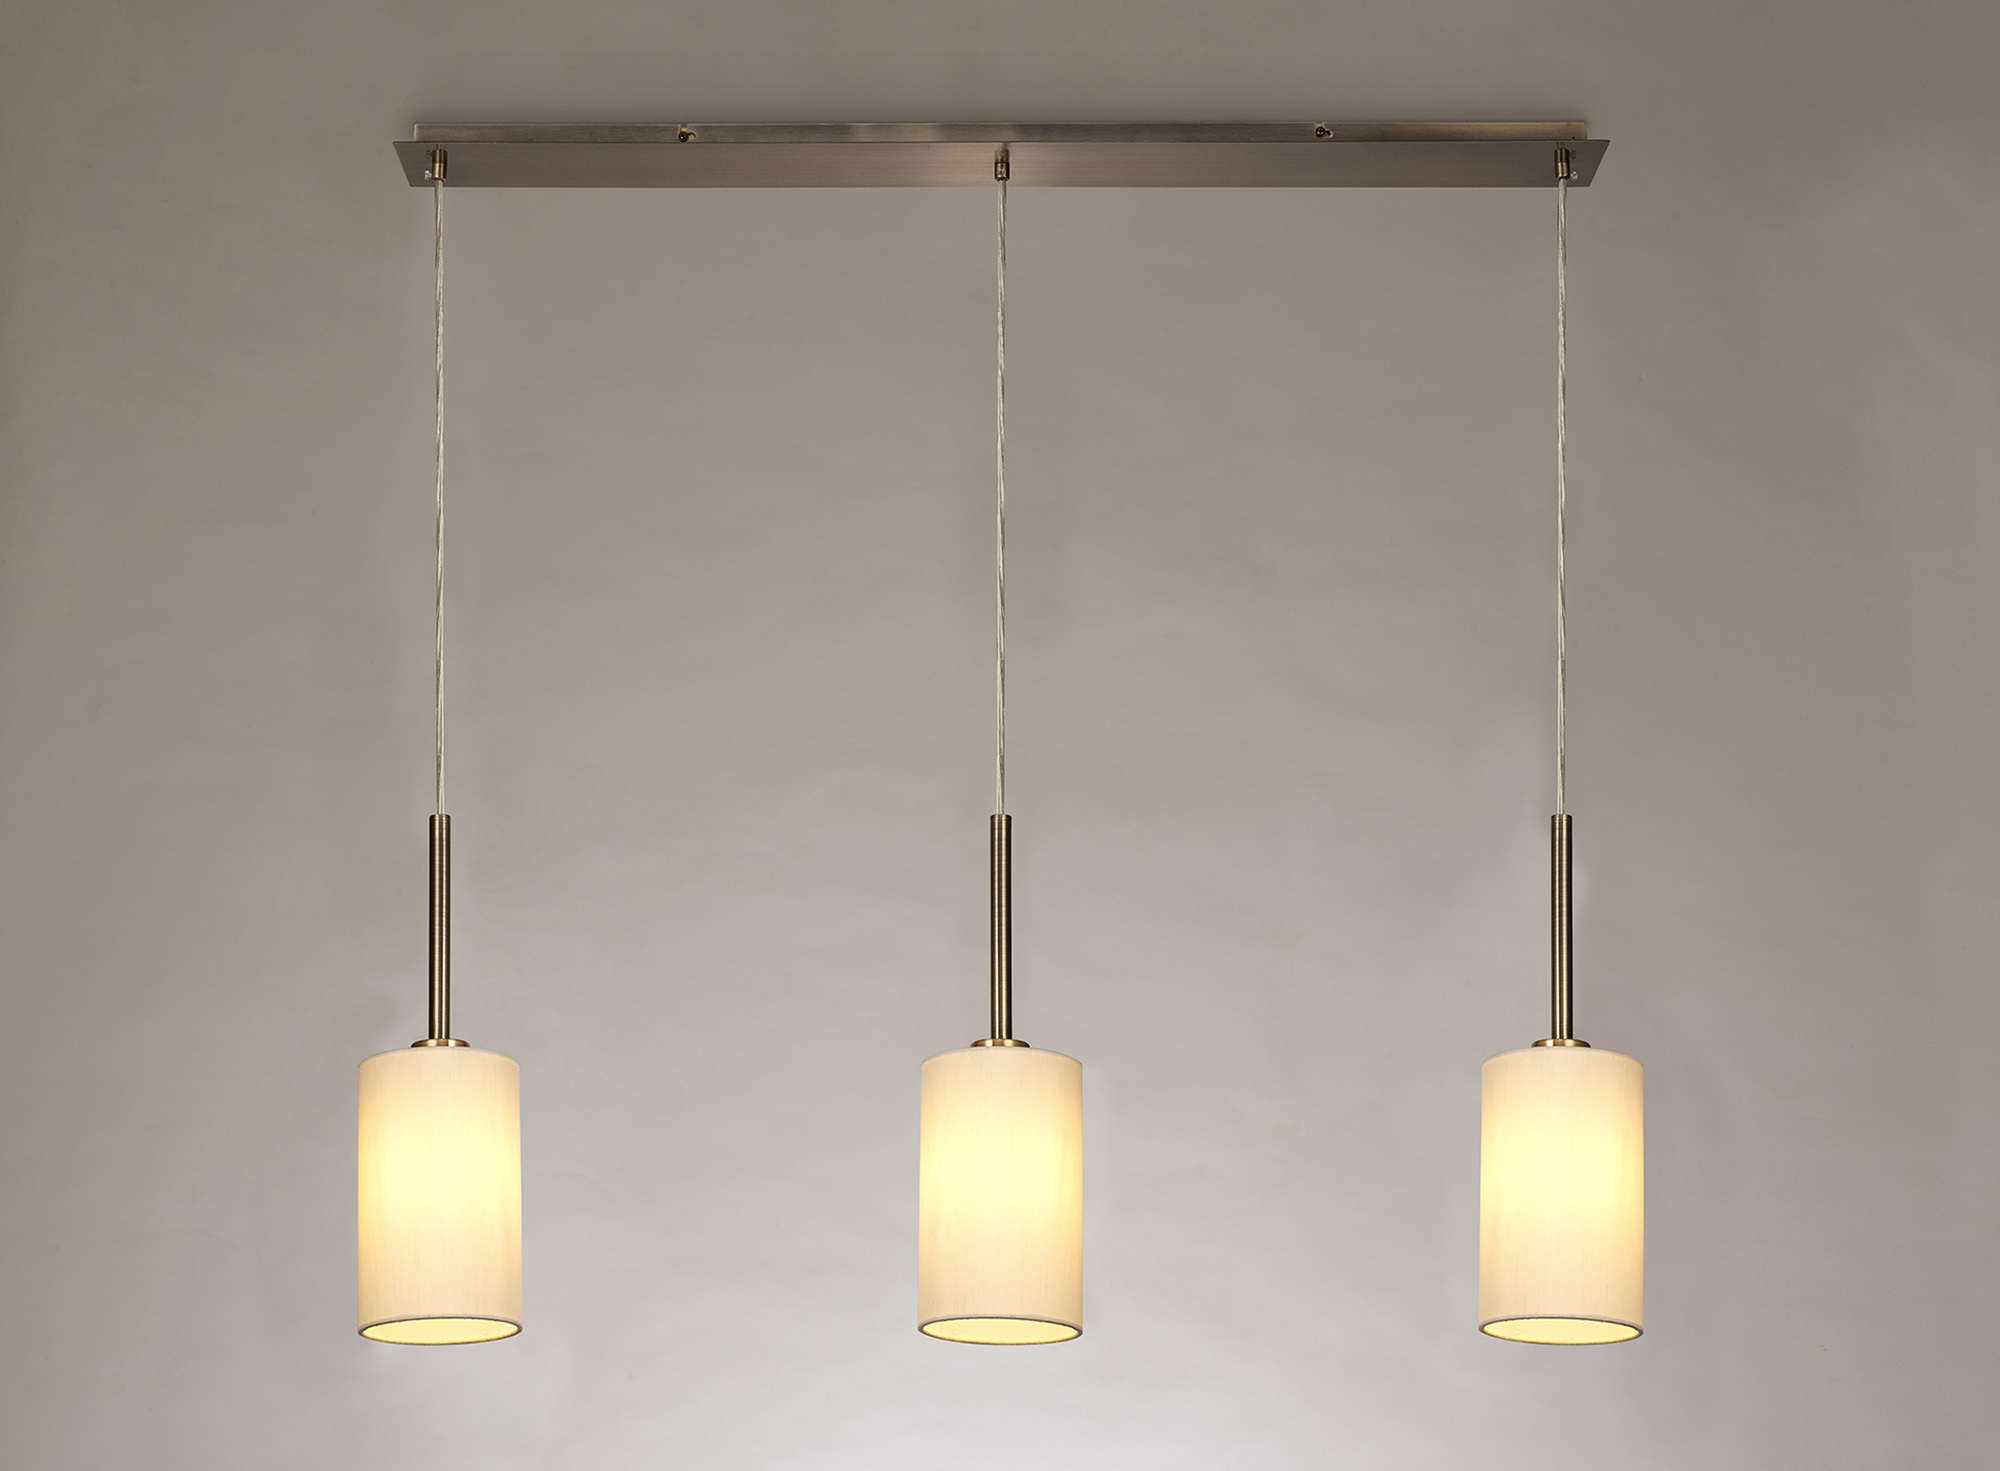 Baymont AB IV Ceiling Lights Deco Linear Fittings